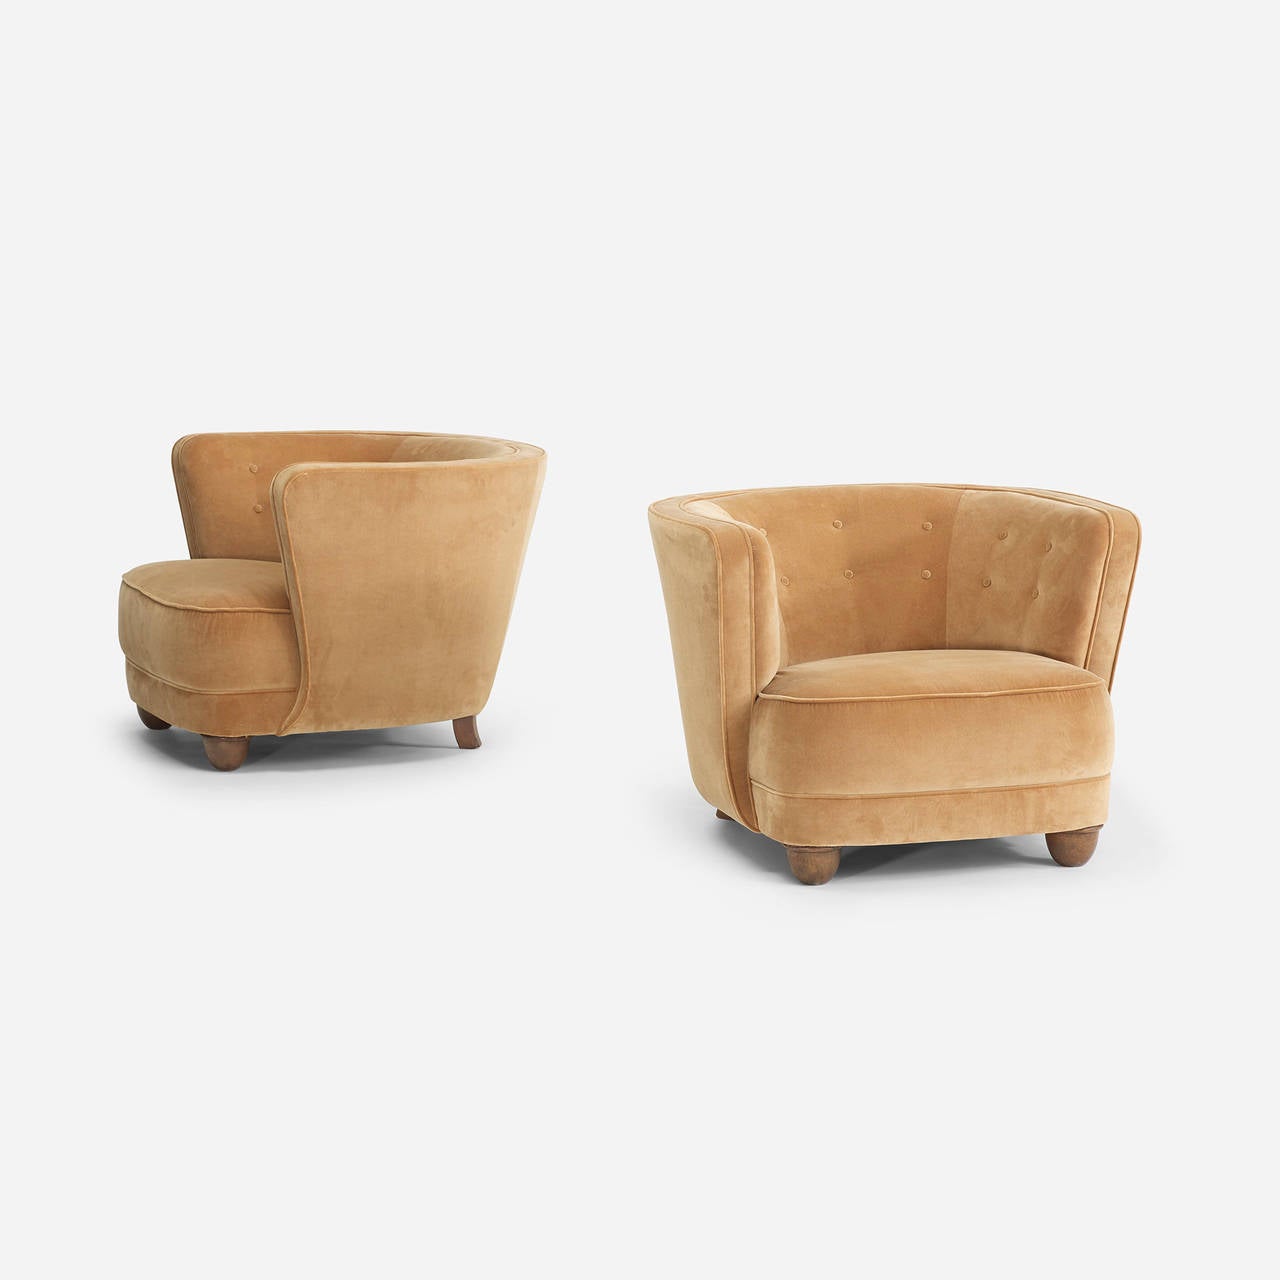 Pair of Danish Cabinetmaker Lounge Chairs In Excellent Condition For Sale In Chicago, IL